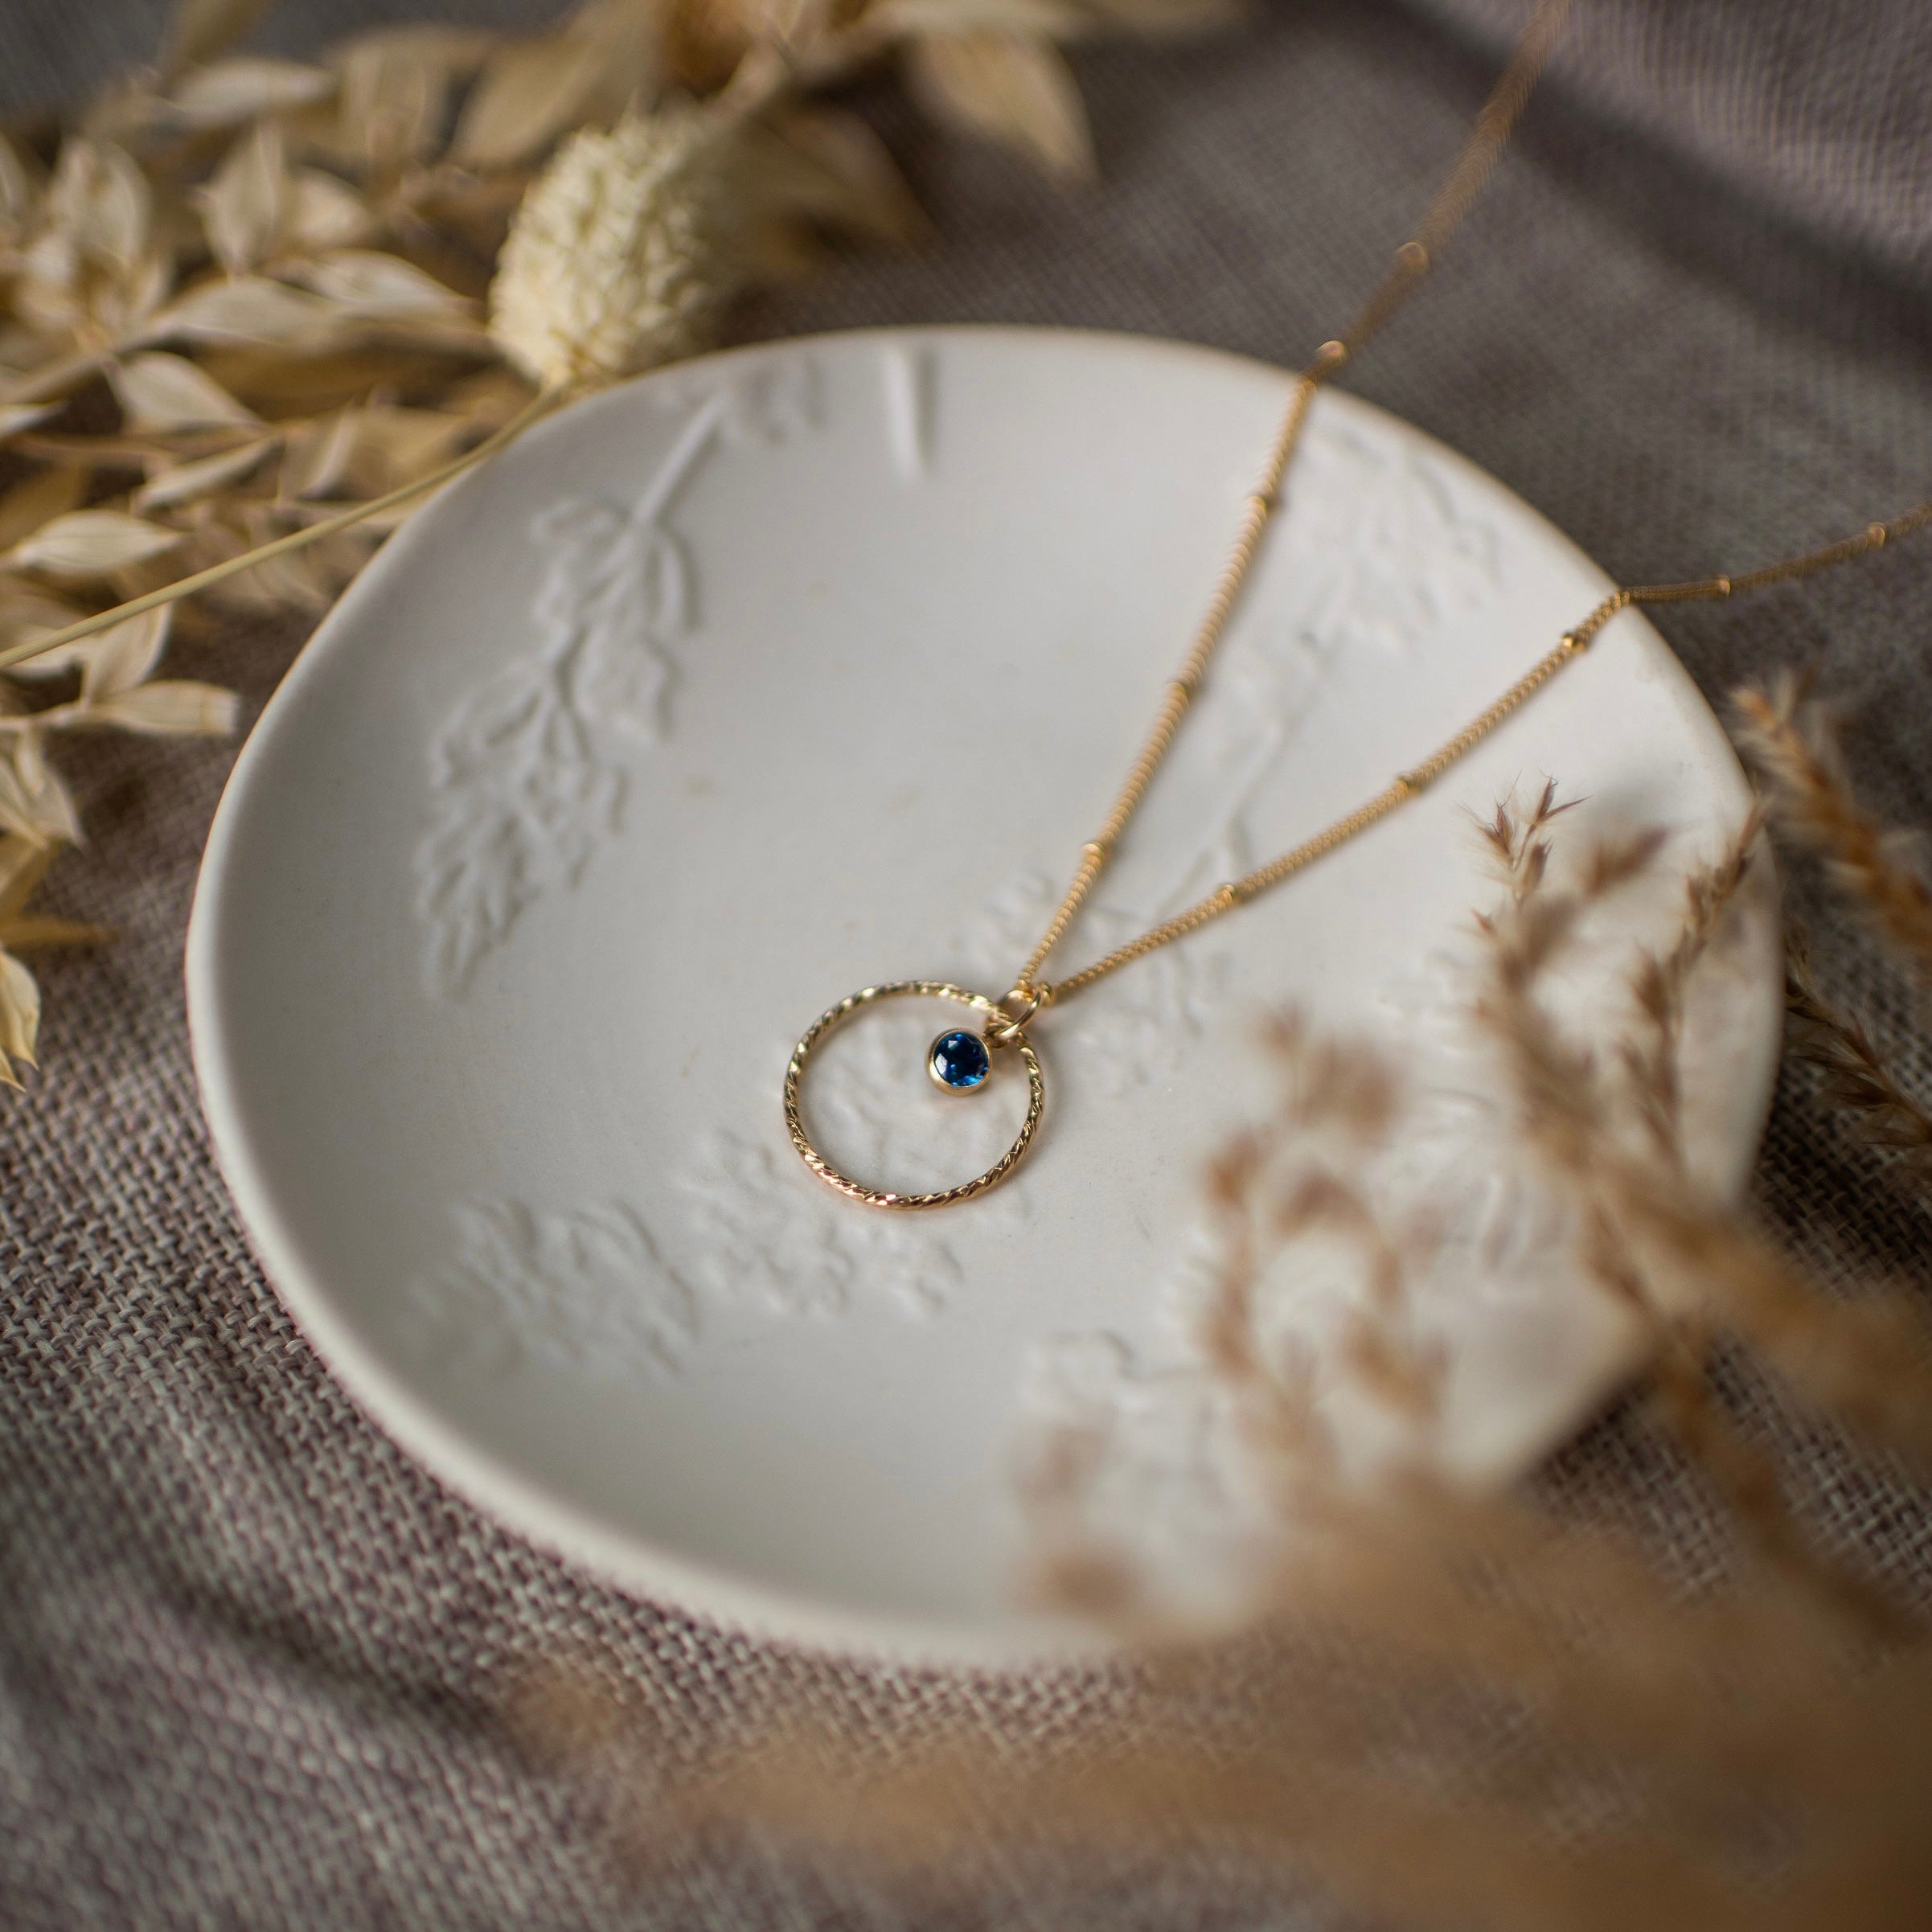 Gold Filled Birthstone Necklace, Sapphire Stone